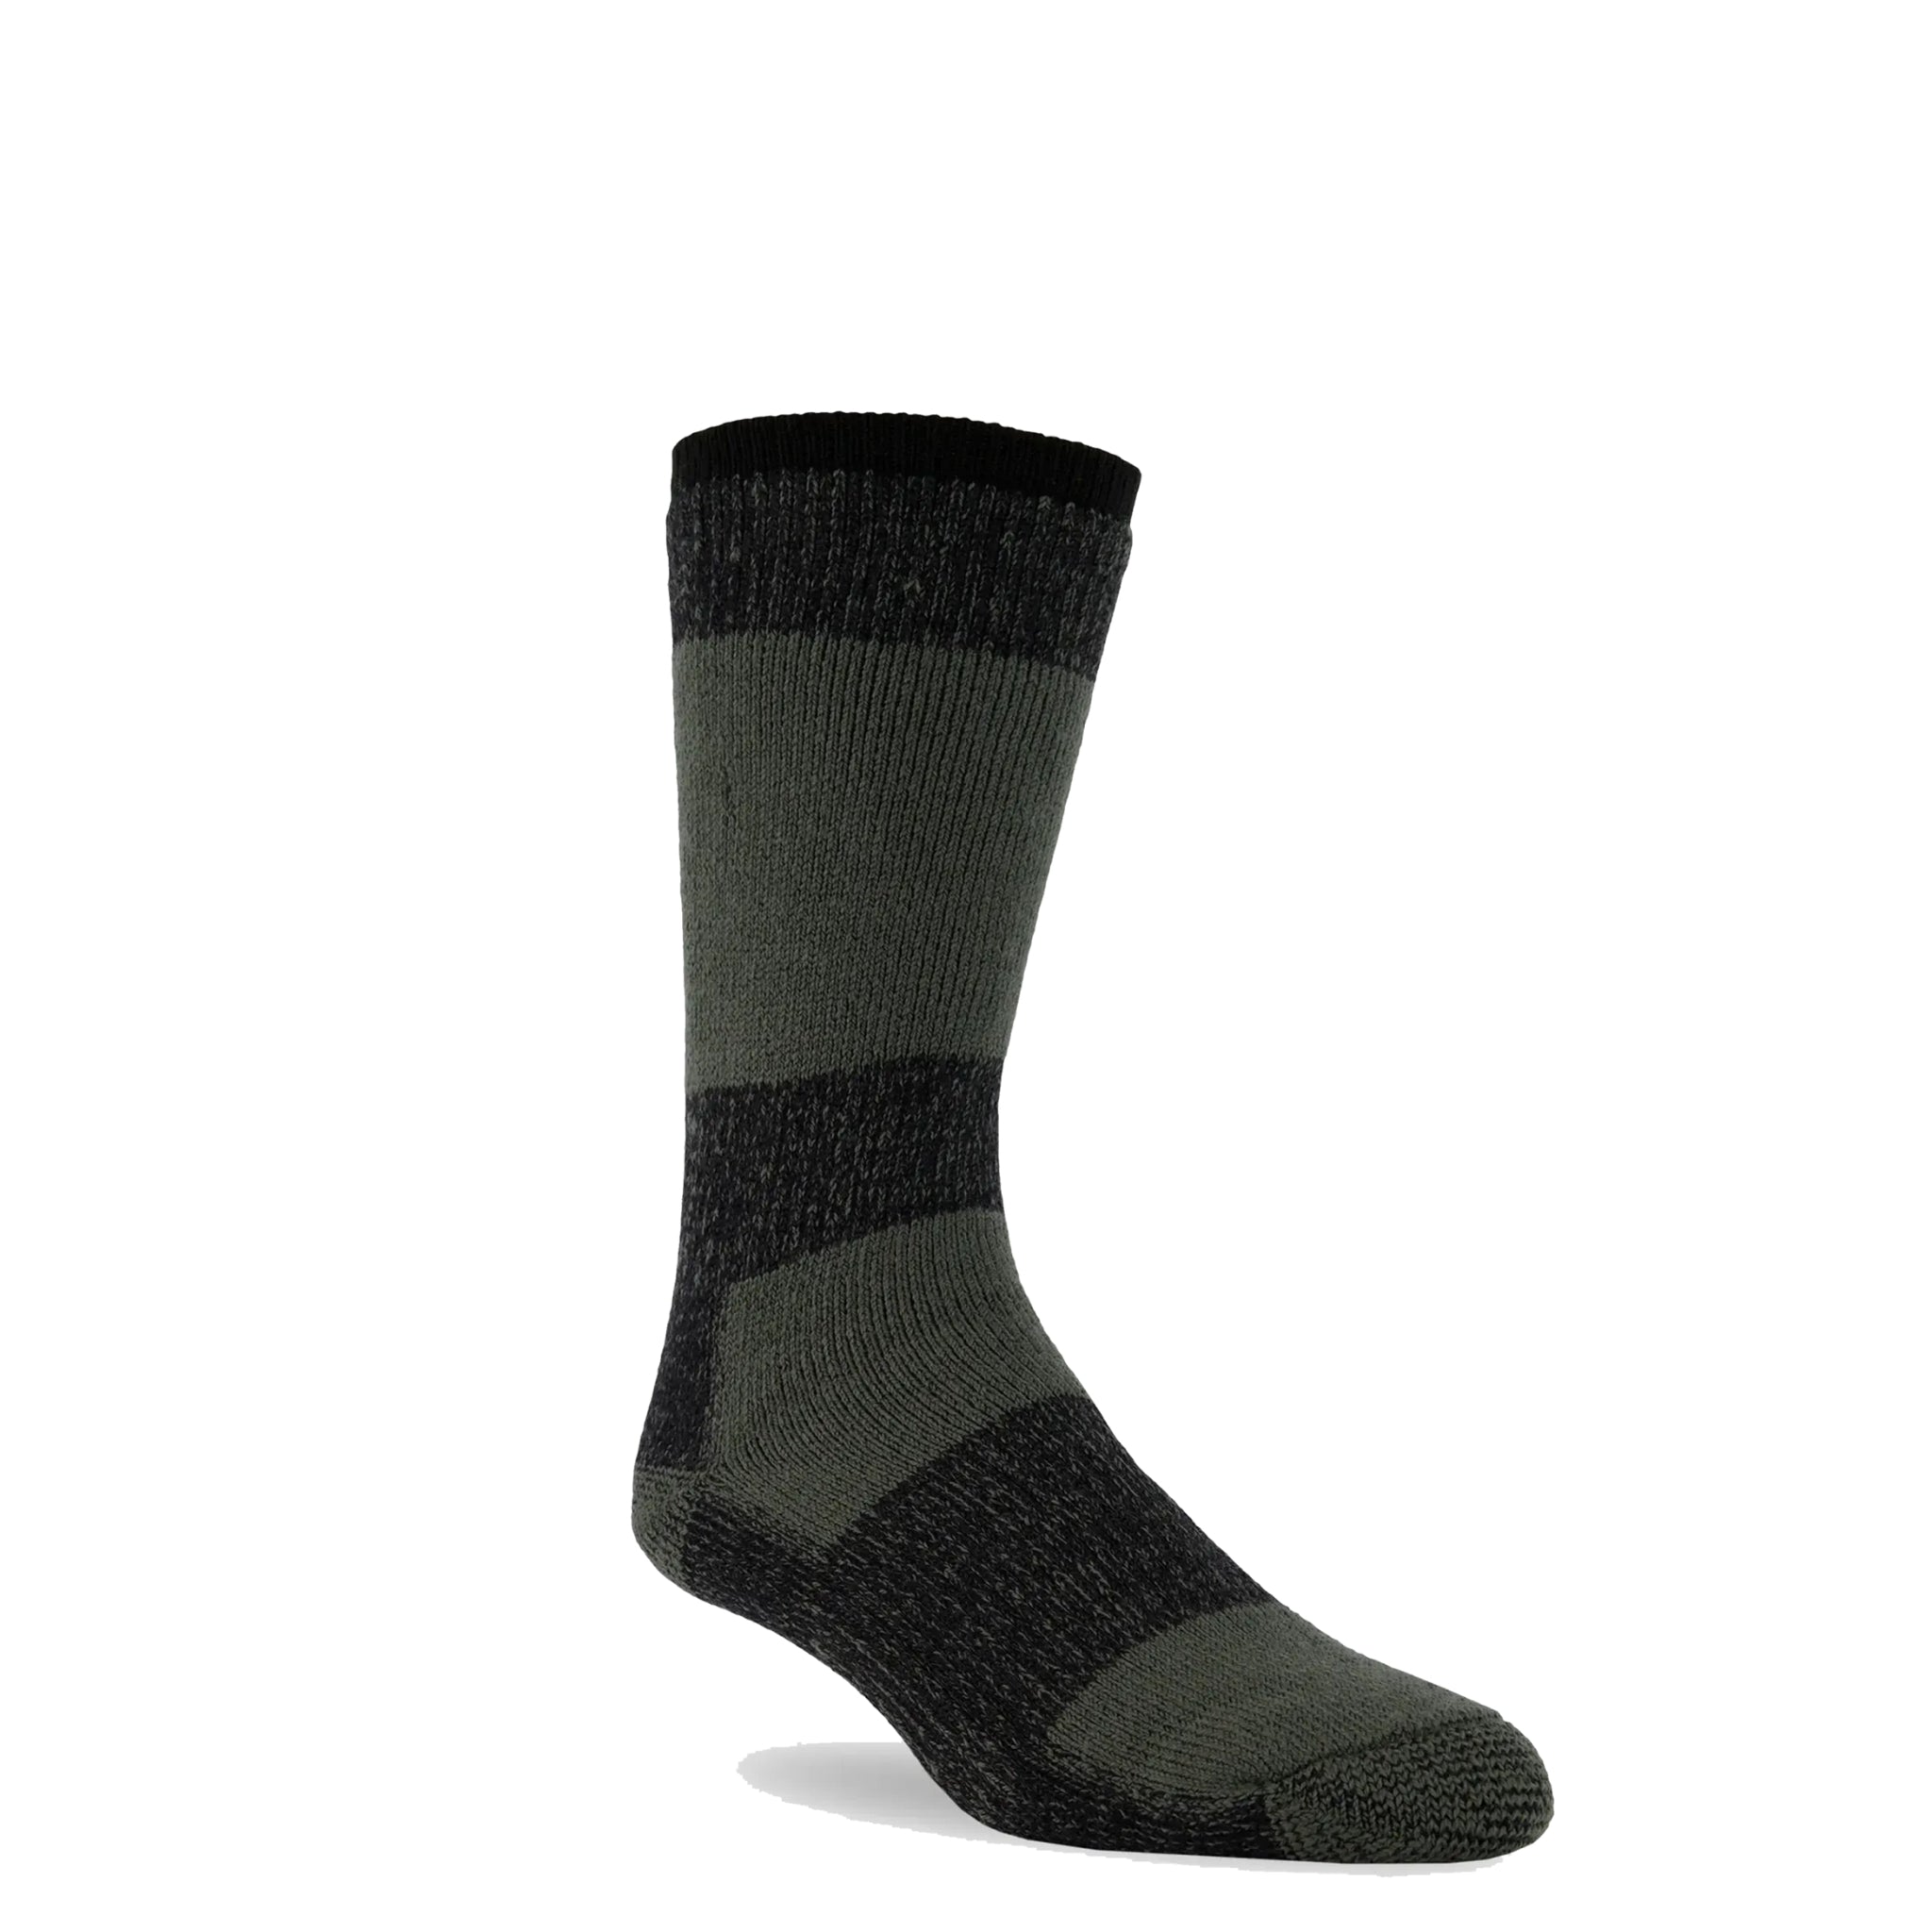 one green heavyweight sock standing on its own on a white background